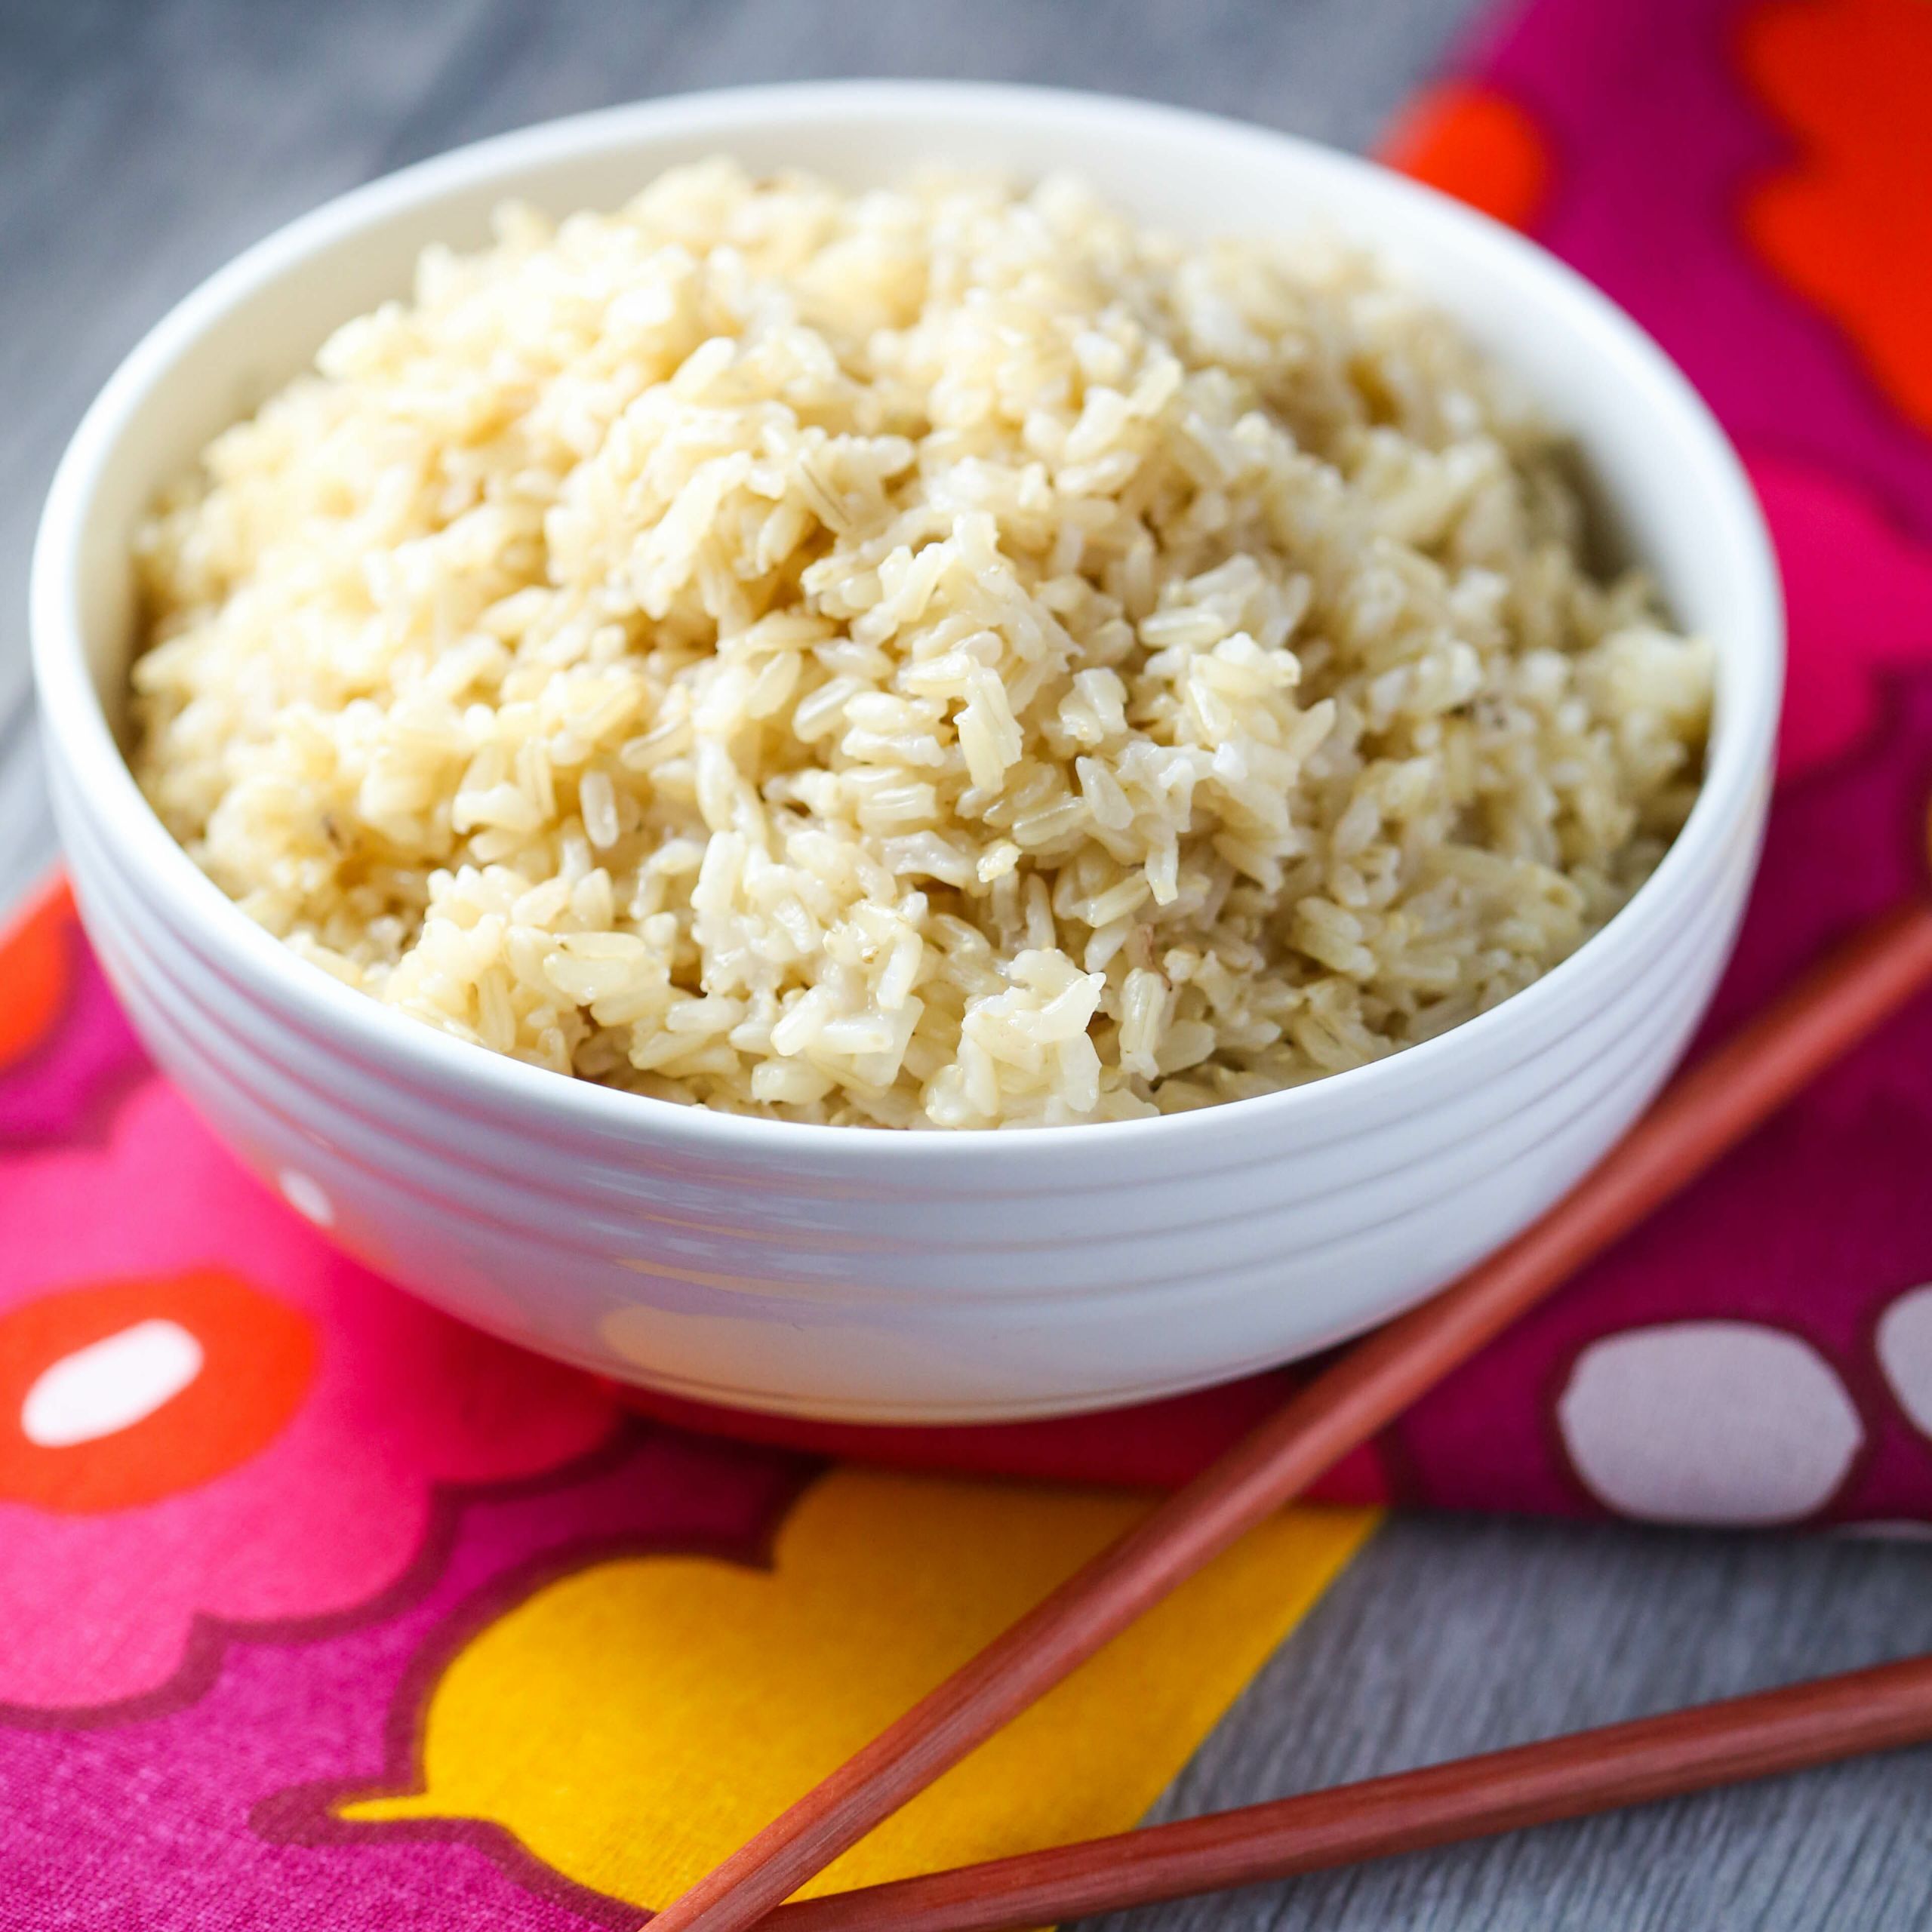 Brown Rice In Instant Pot
 How to make perfect Instant Pot Brown Rice every time